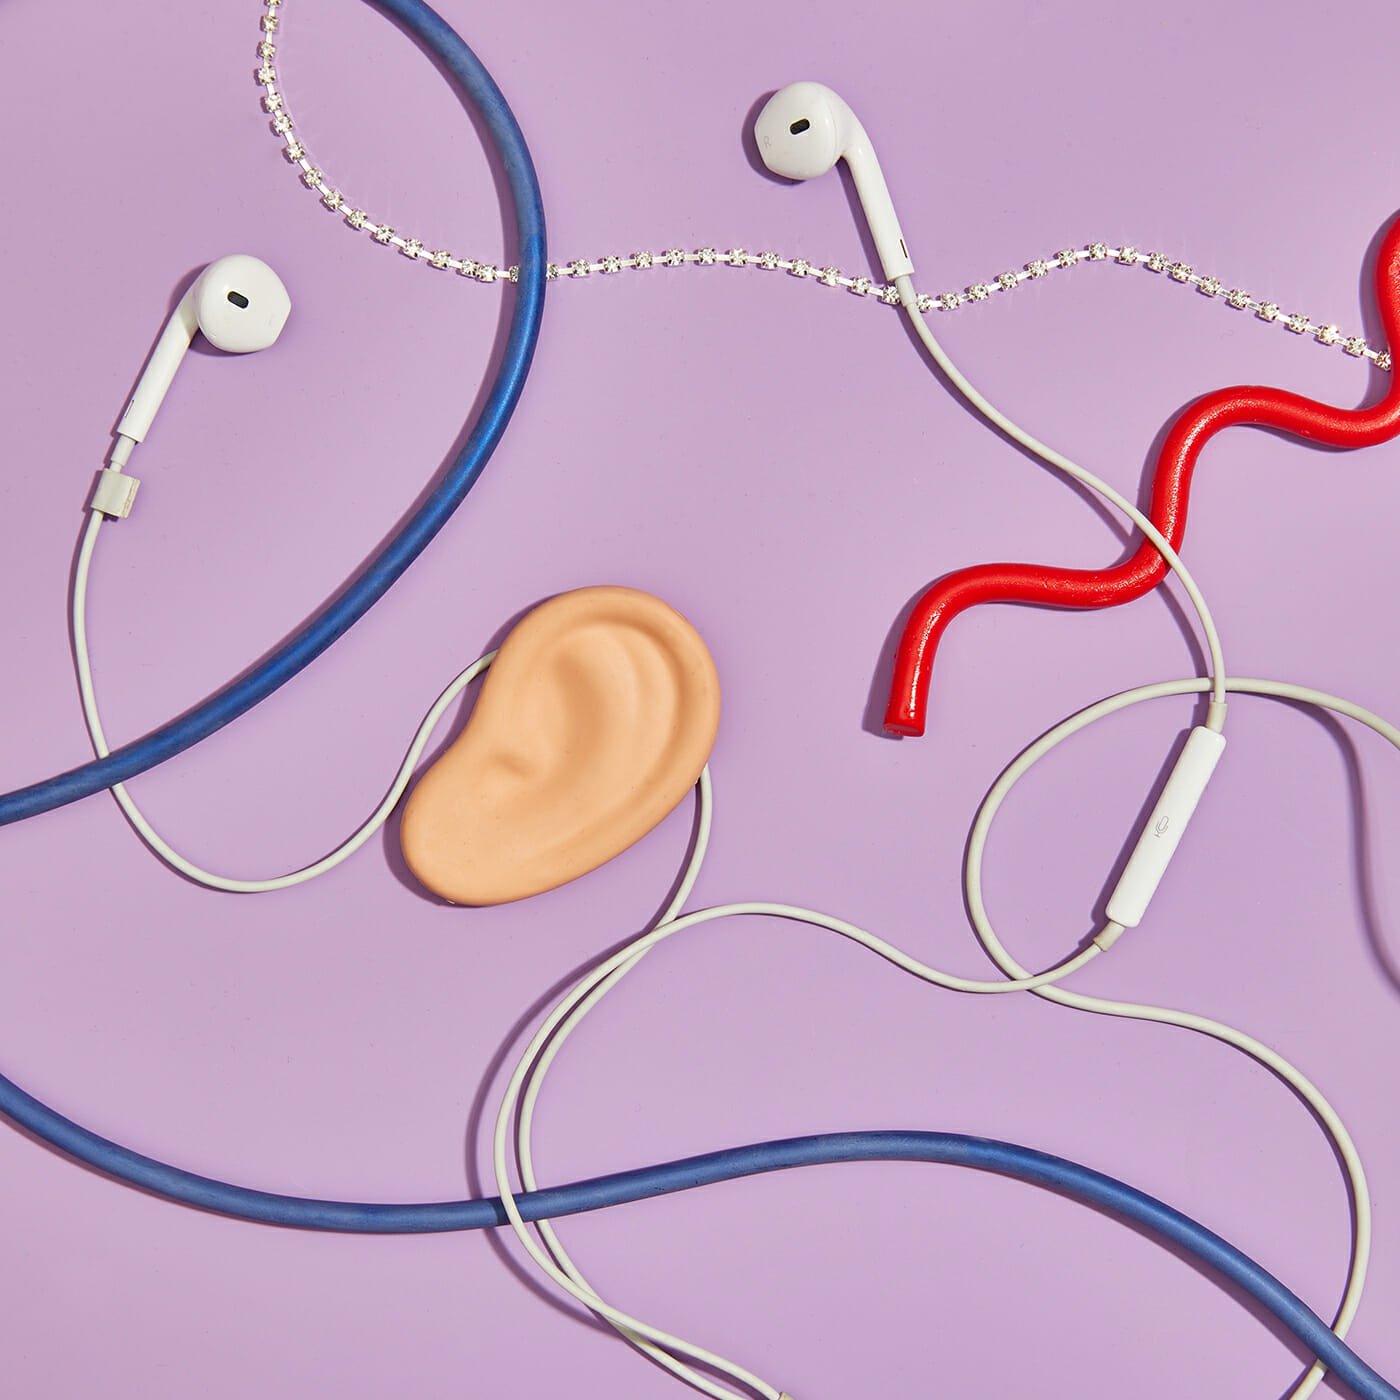 White earbuds, some wires, and fake ear on a purple background